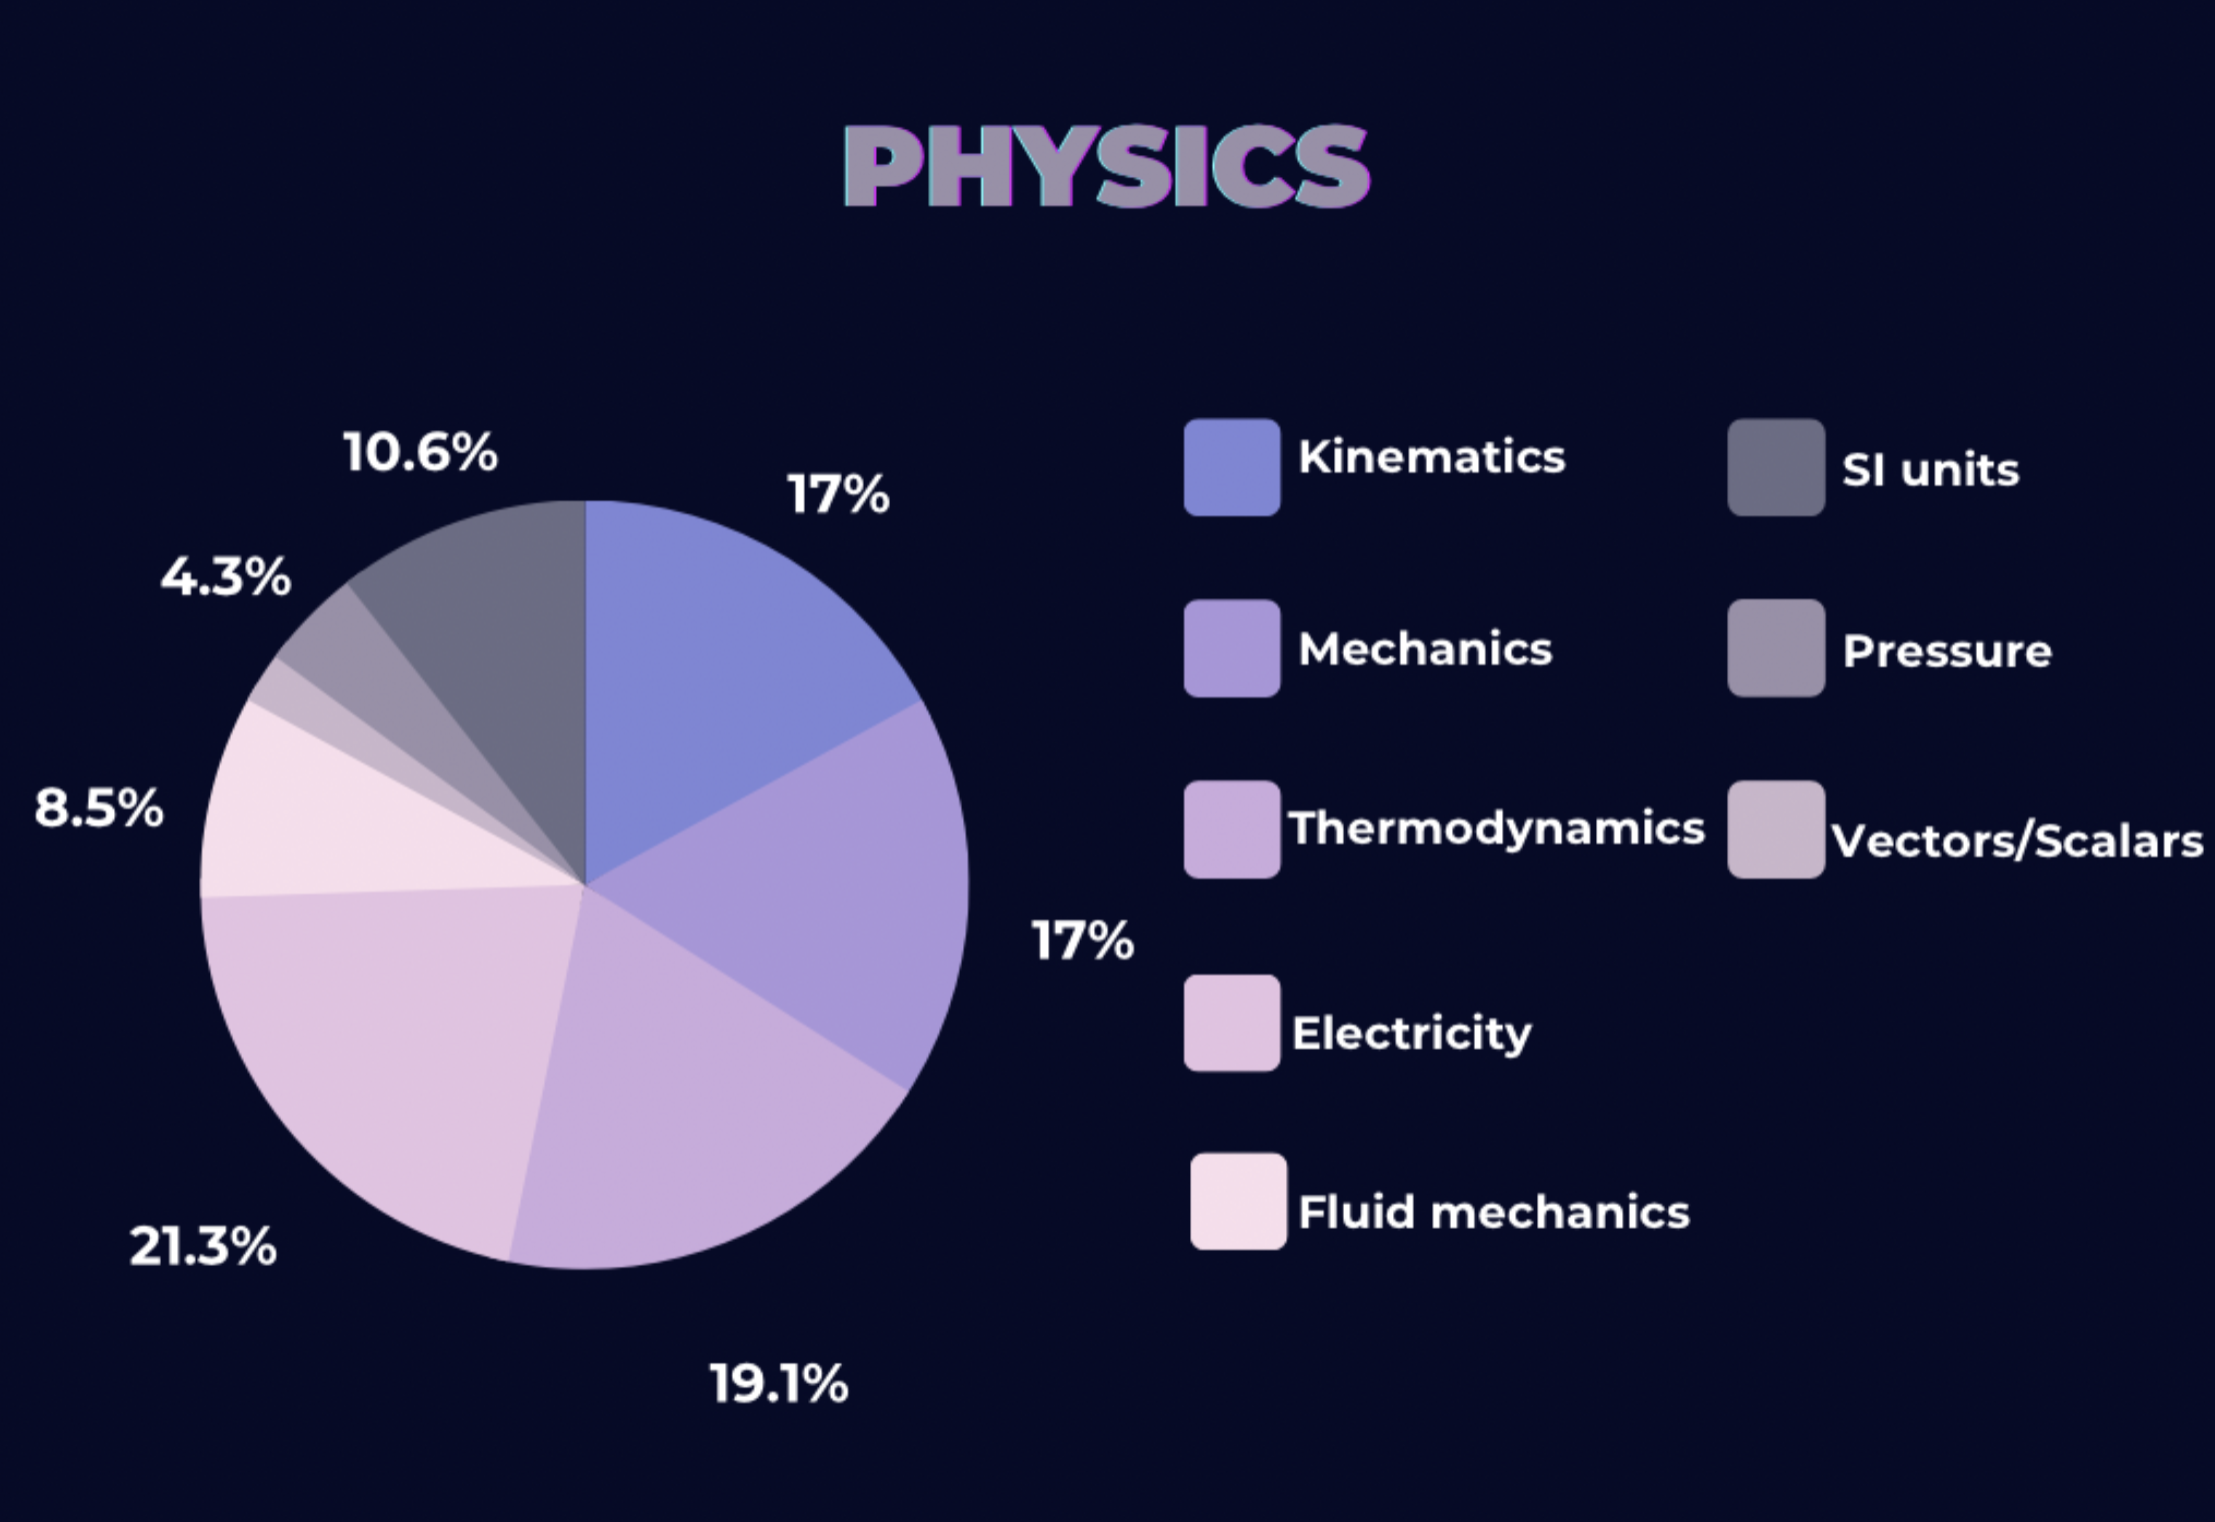 IMAT Physics section breakdown by topics 2011 to 2022